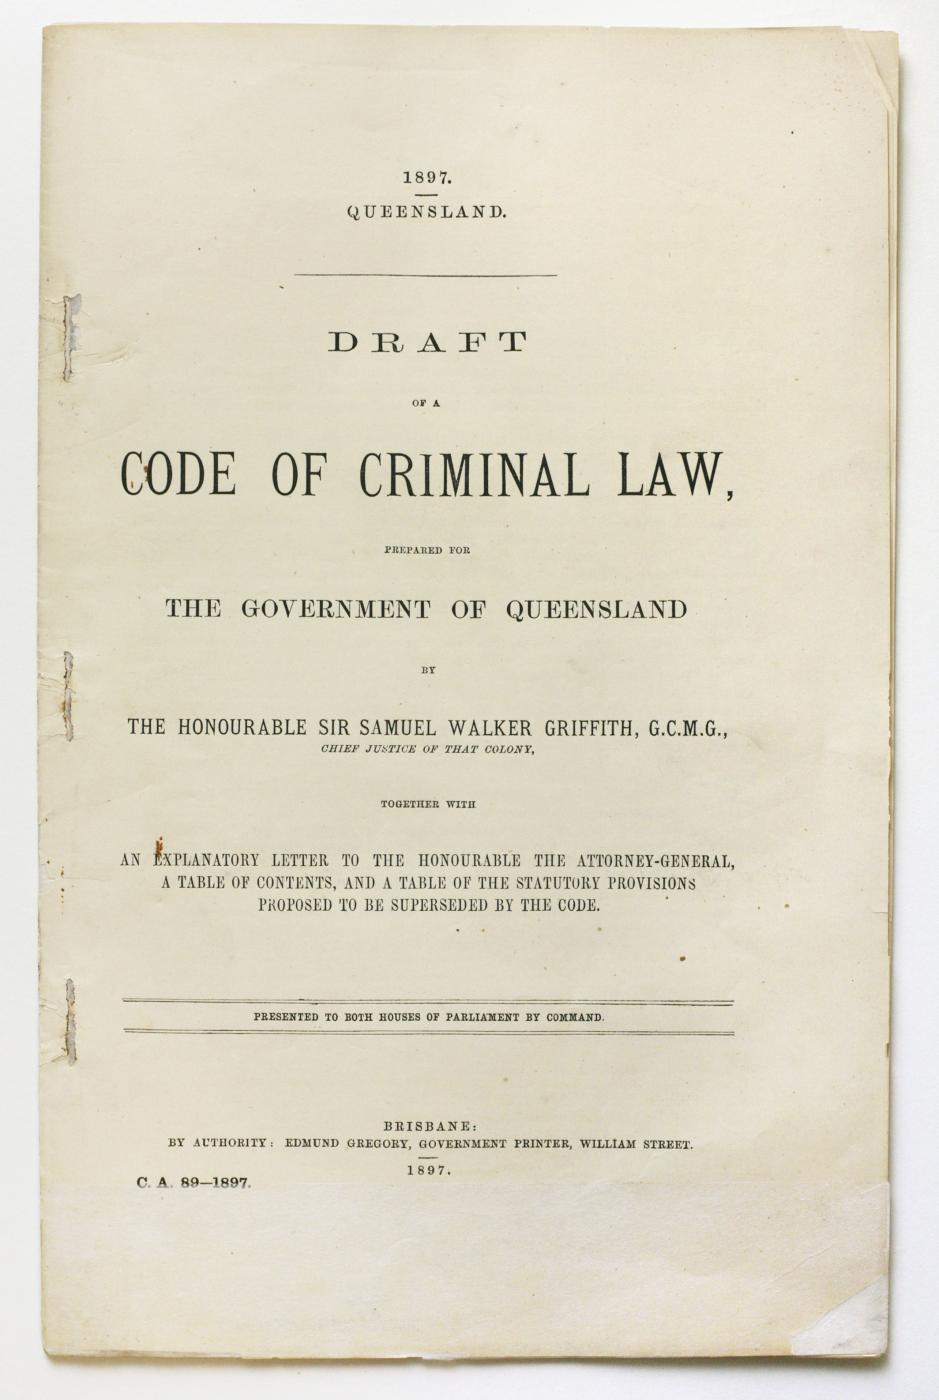 Draft of a Code of Criminal Law - Front page